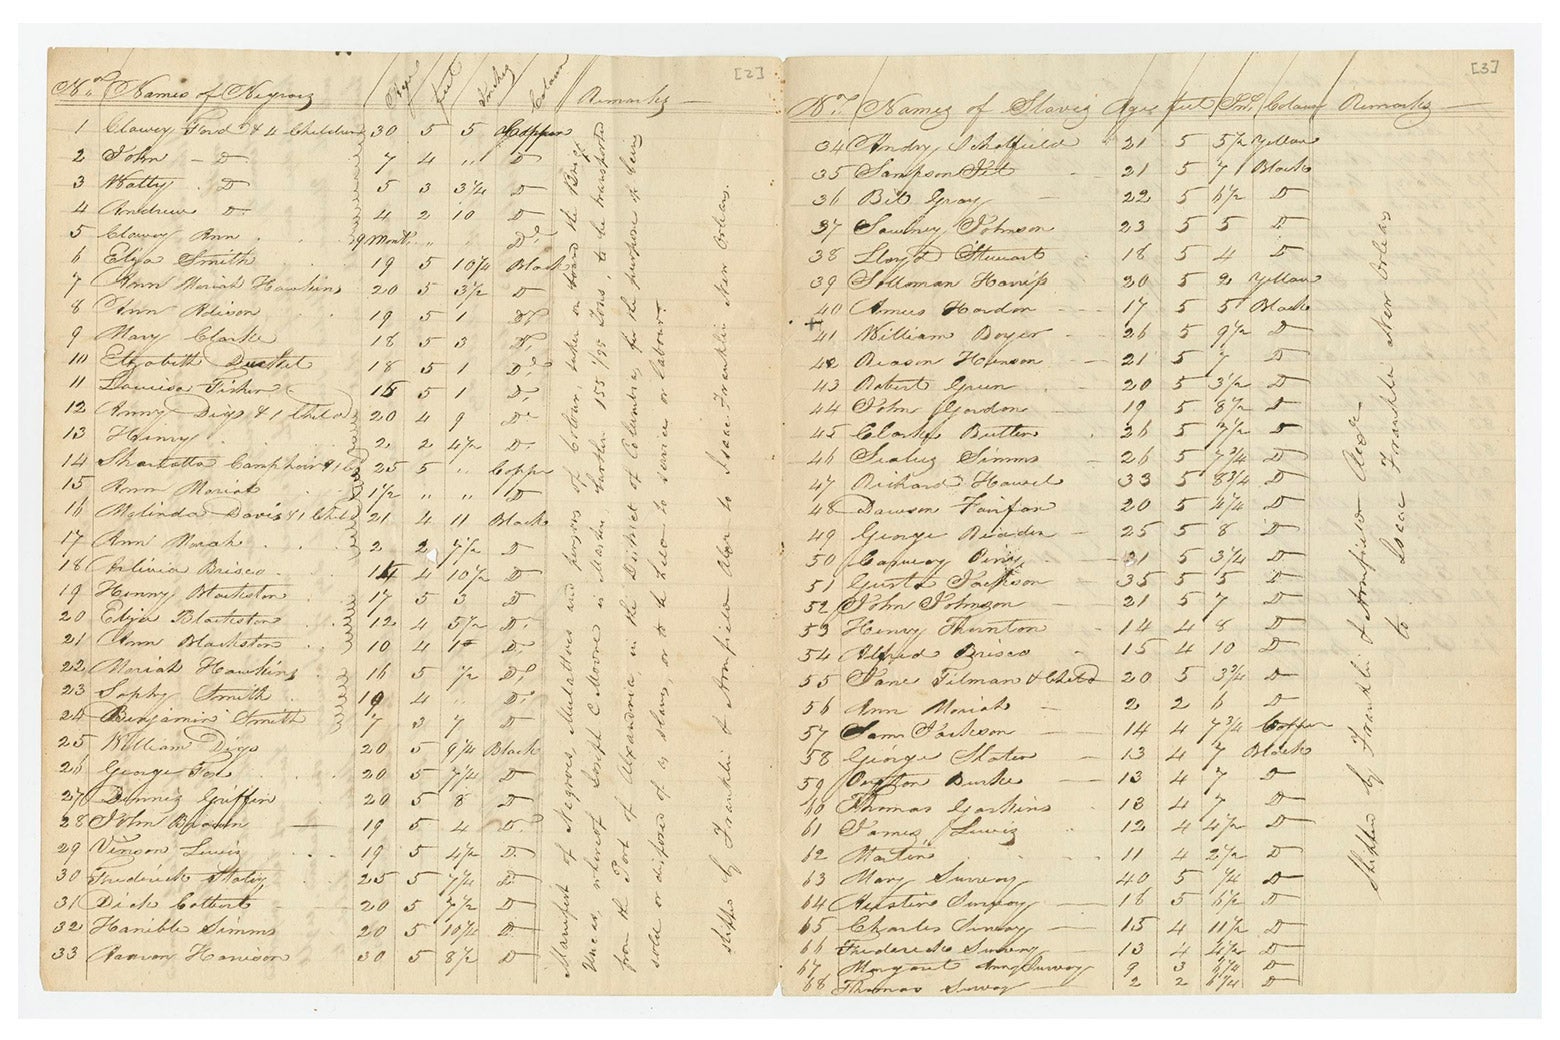 Two pages of a ship's manifest listing enslaved Africans